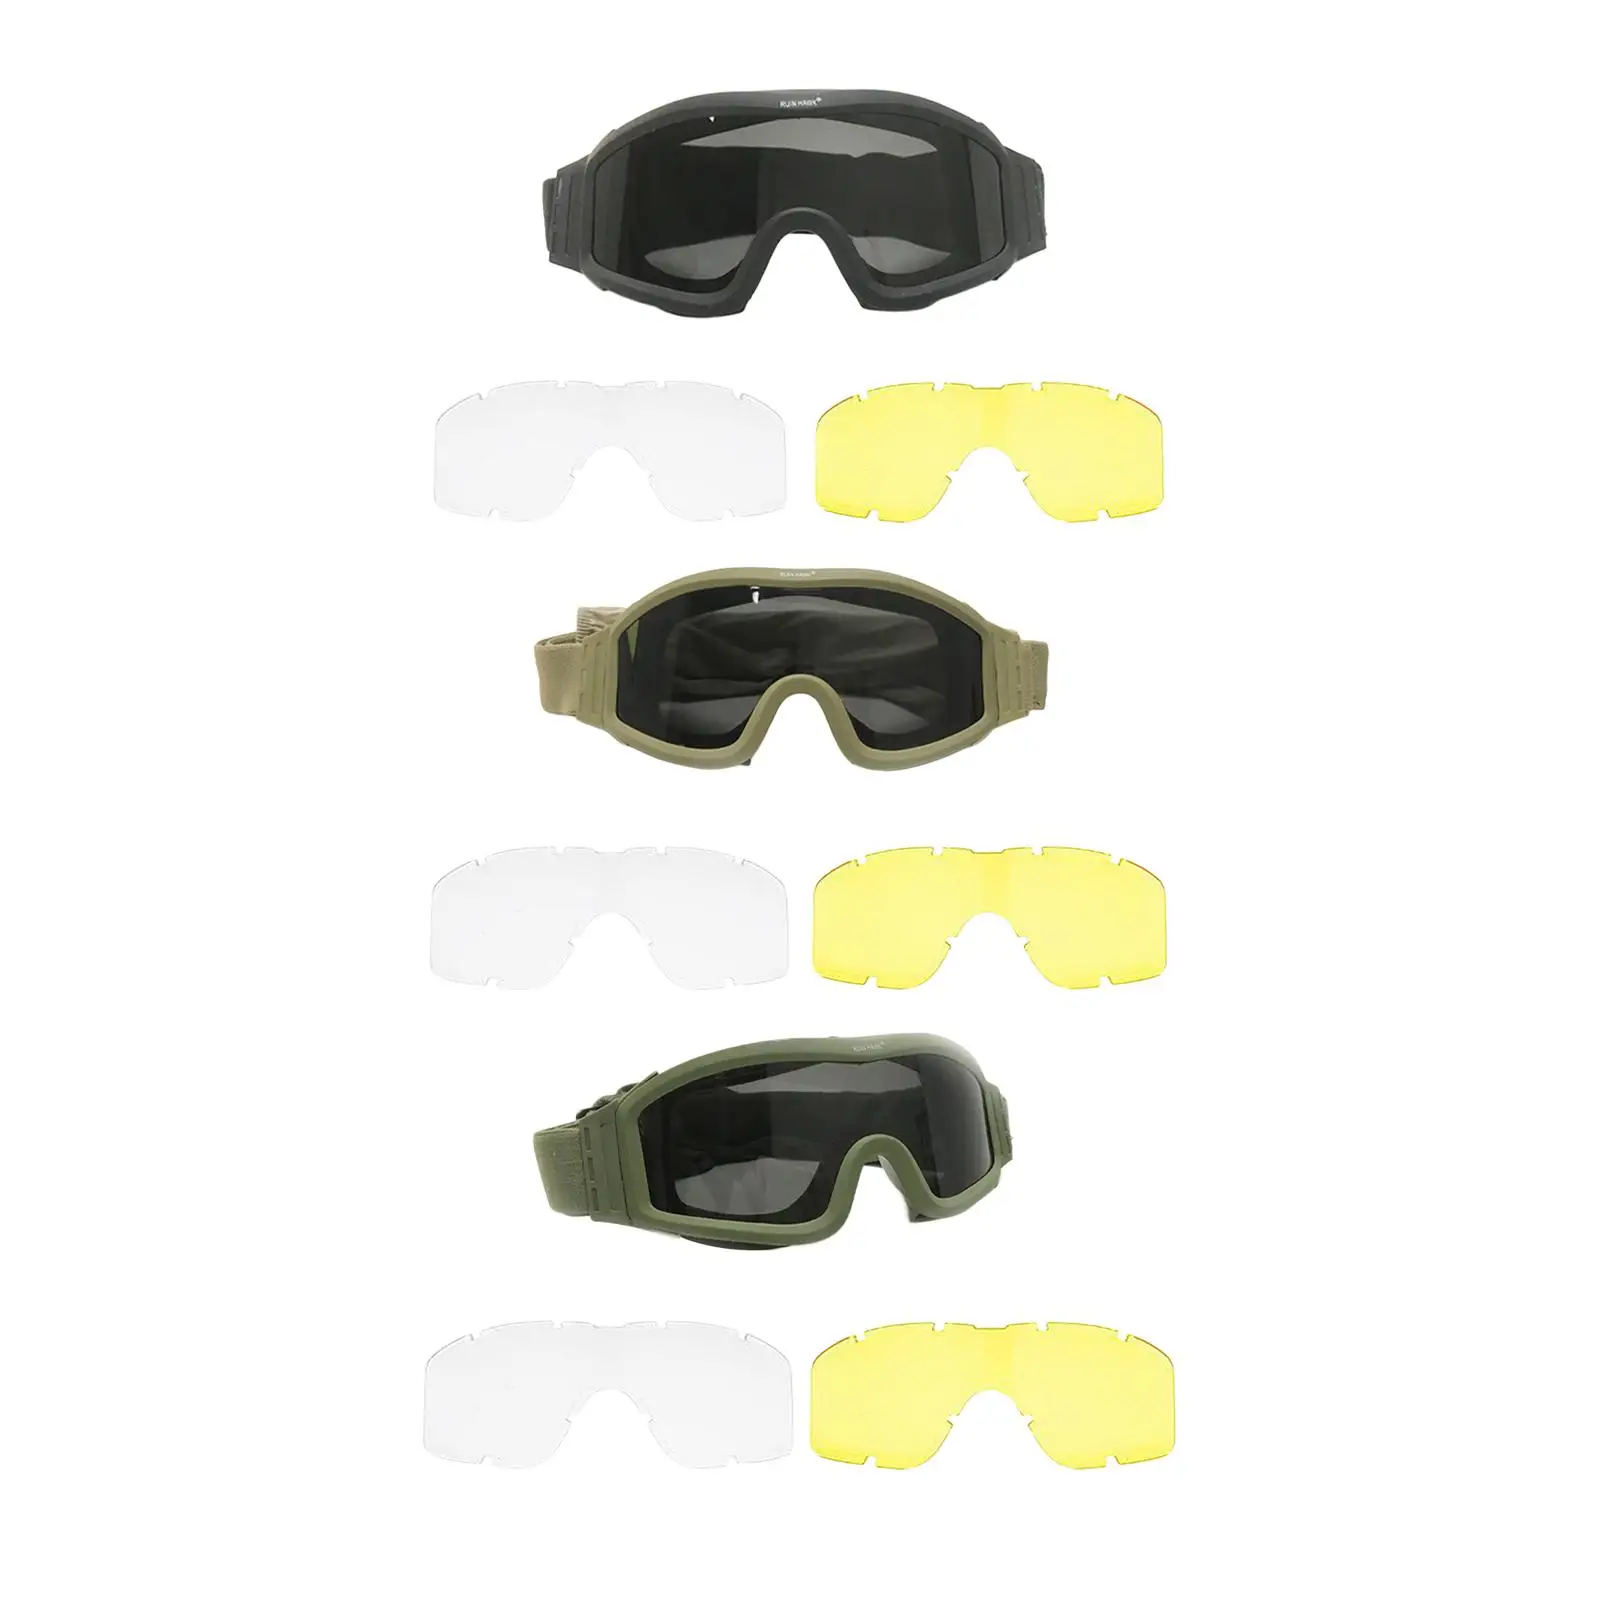 Black Transparent Yellow Goggles Glasses Adjustable for Cycling Shooting